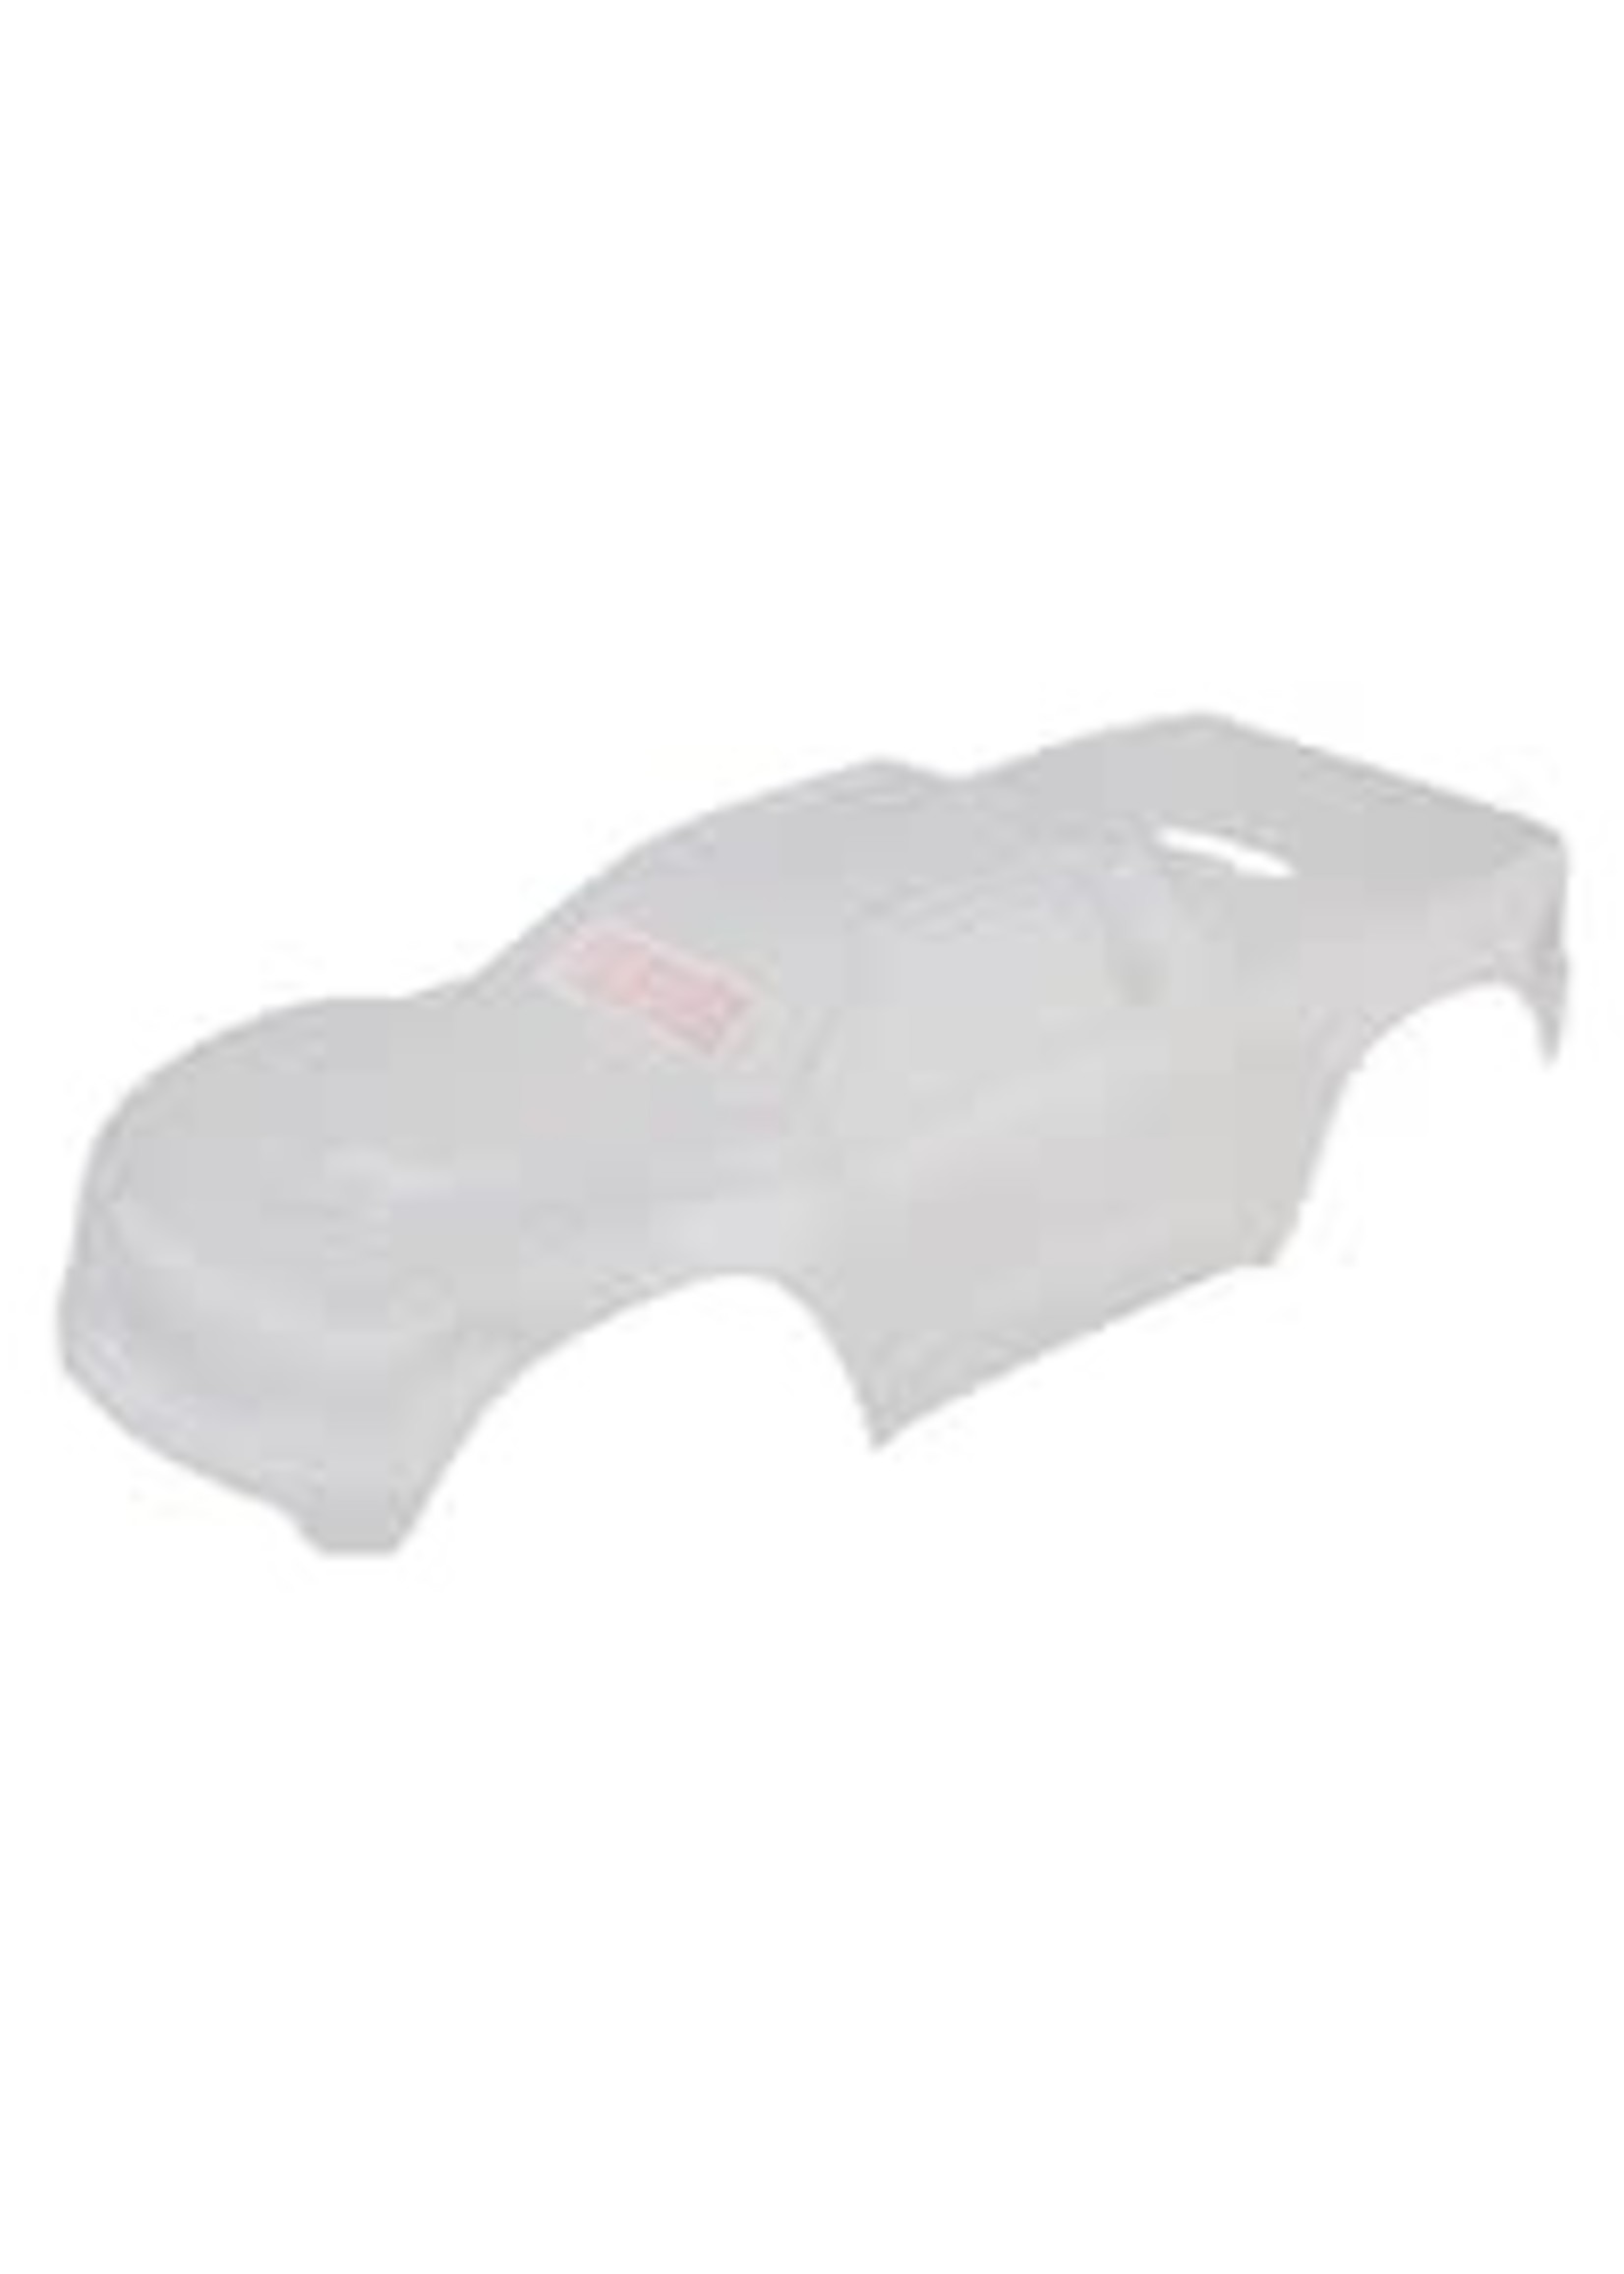 Traxxas 8914 Body, Maxx , heavy duty (clear, requires painting)/ window masks/ decal sheet